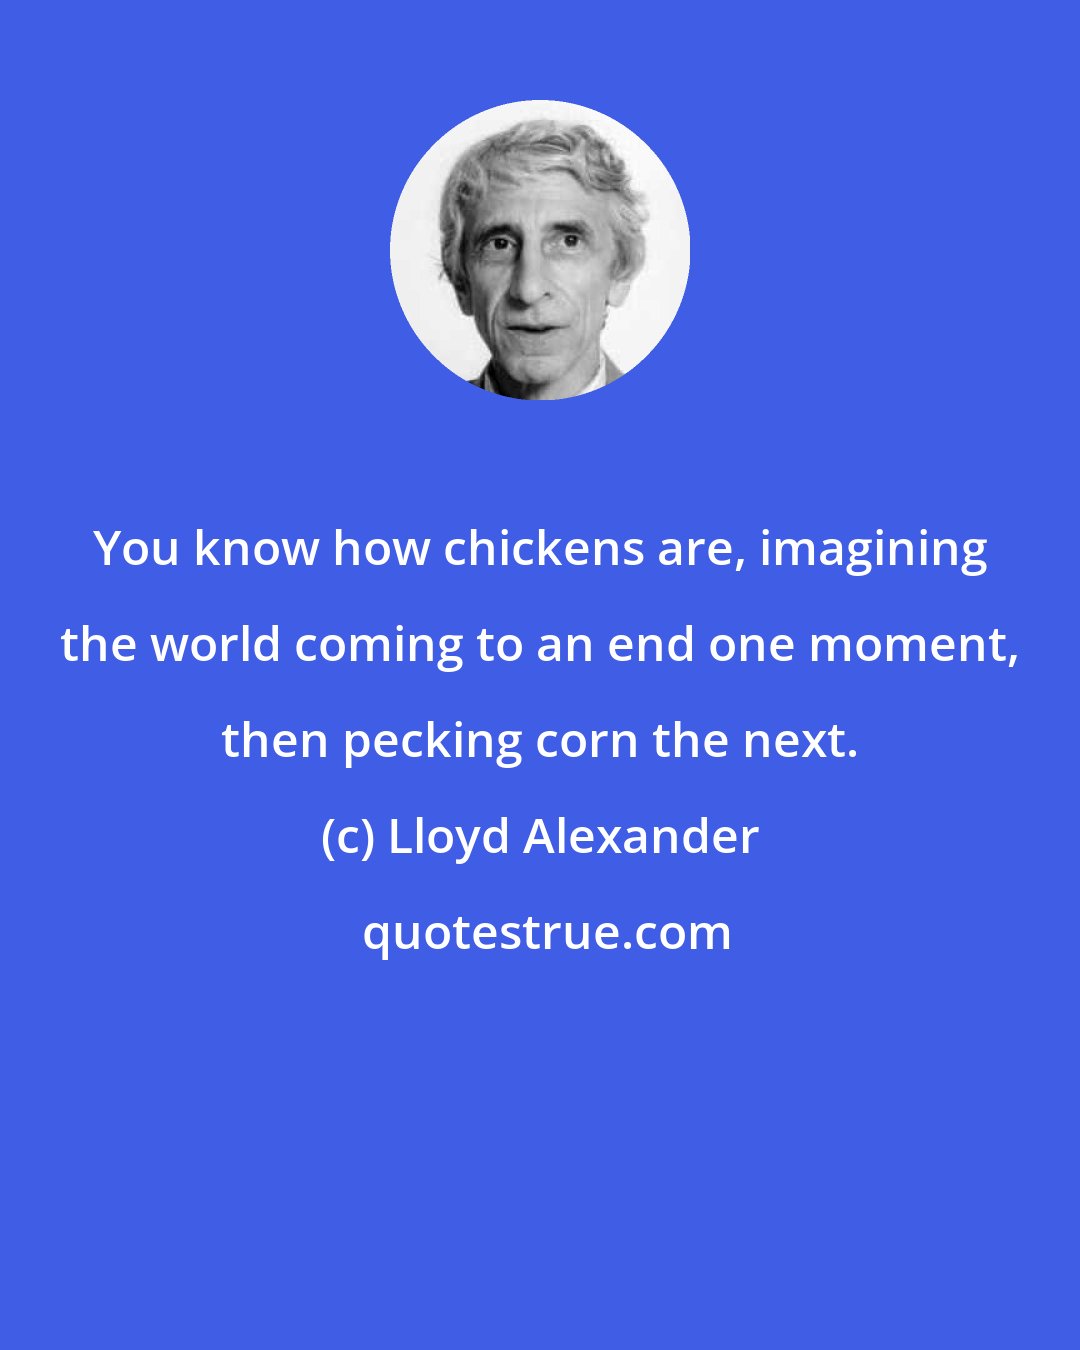 Lloyd Alexander: You know how chickens are, imagining the world coming to an end one moment, then pecking corn the next.